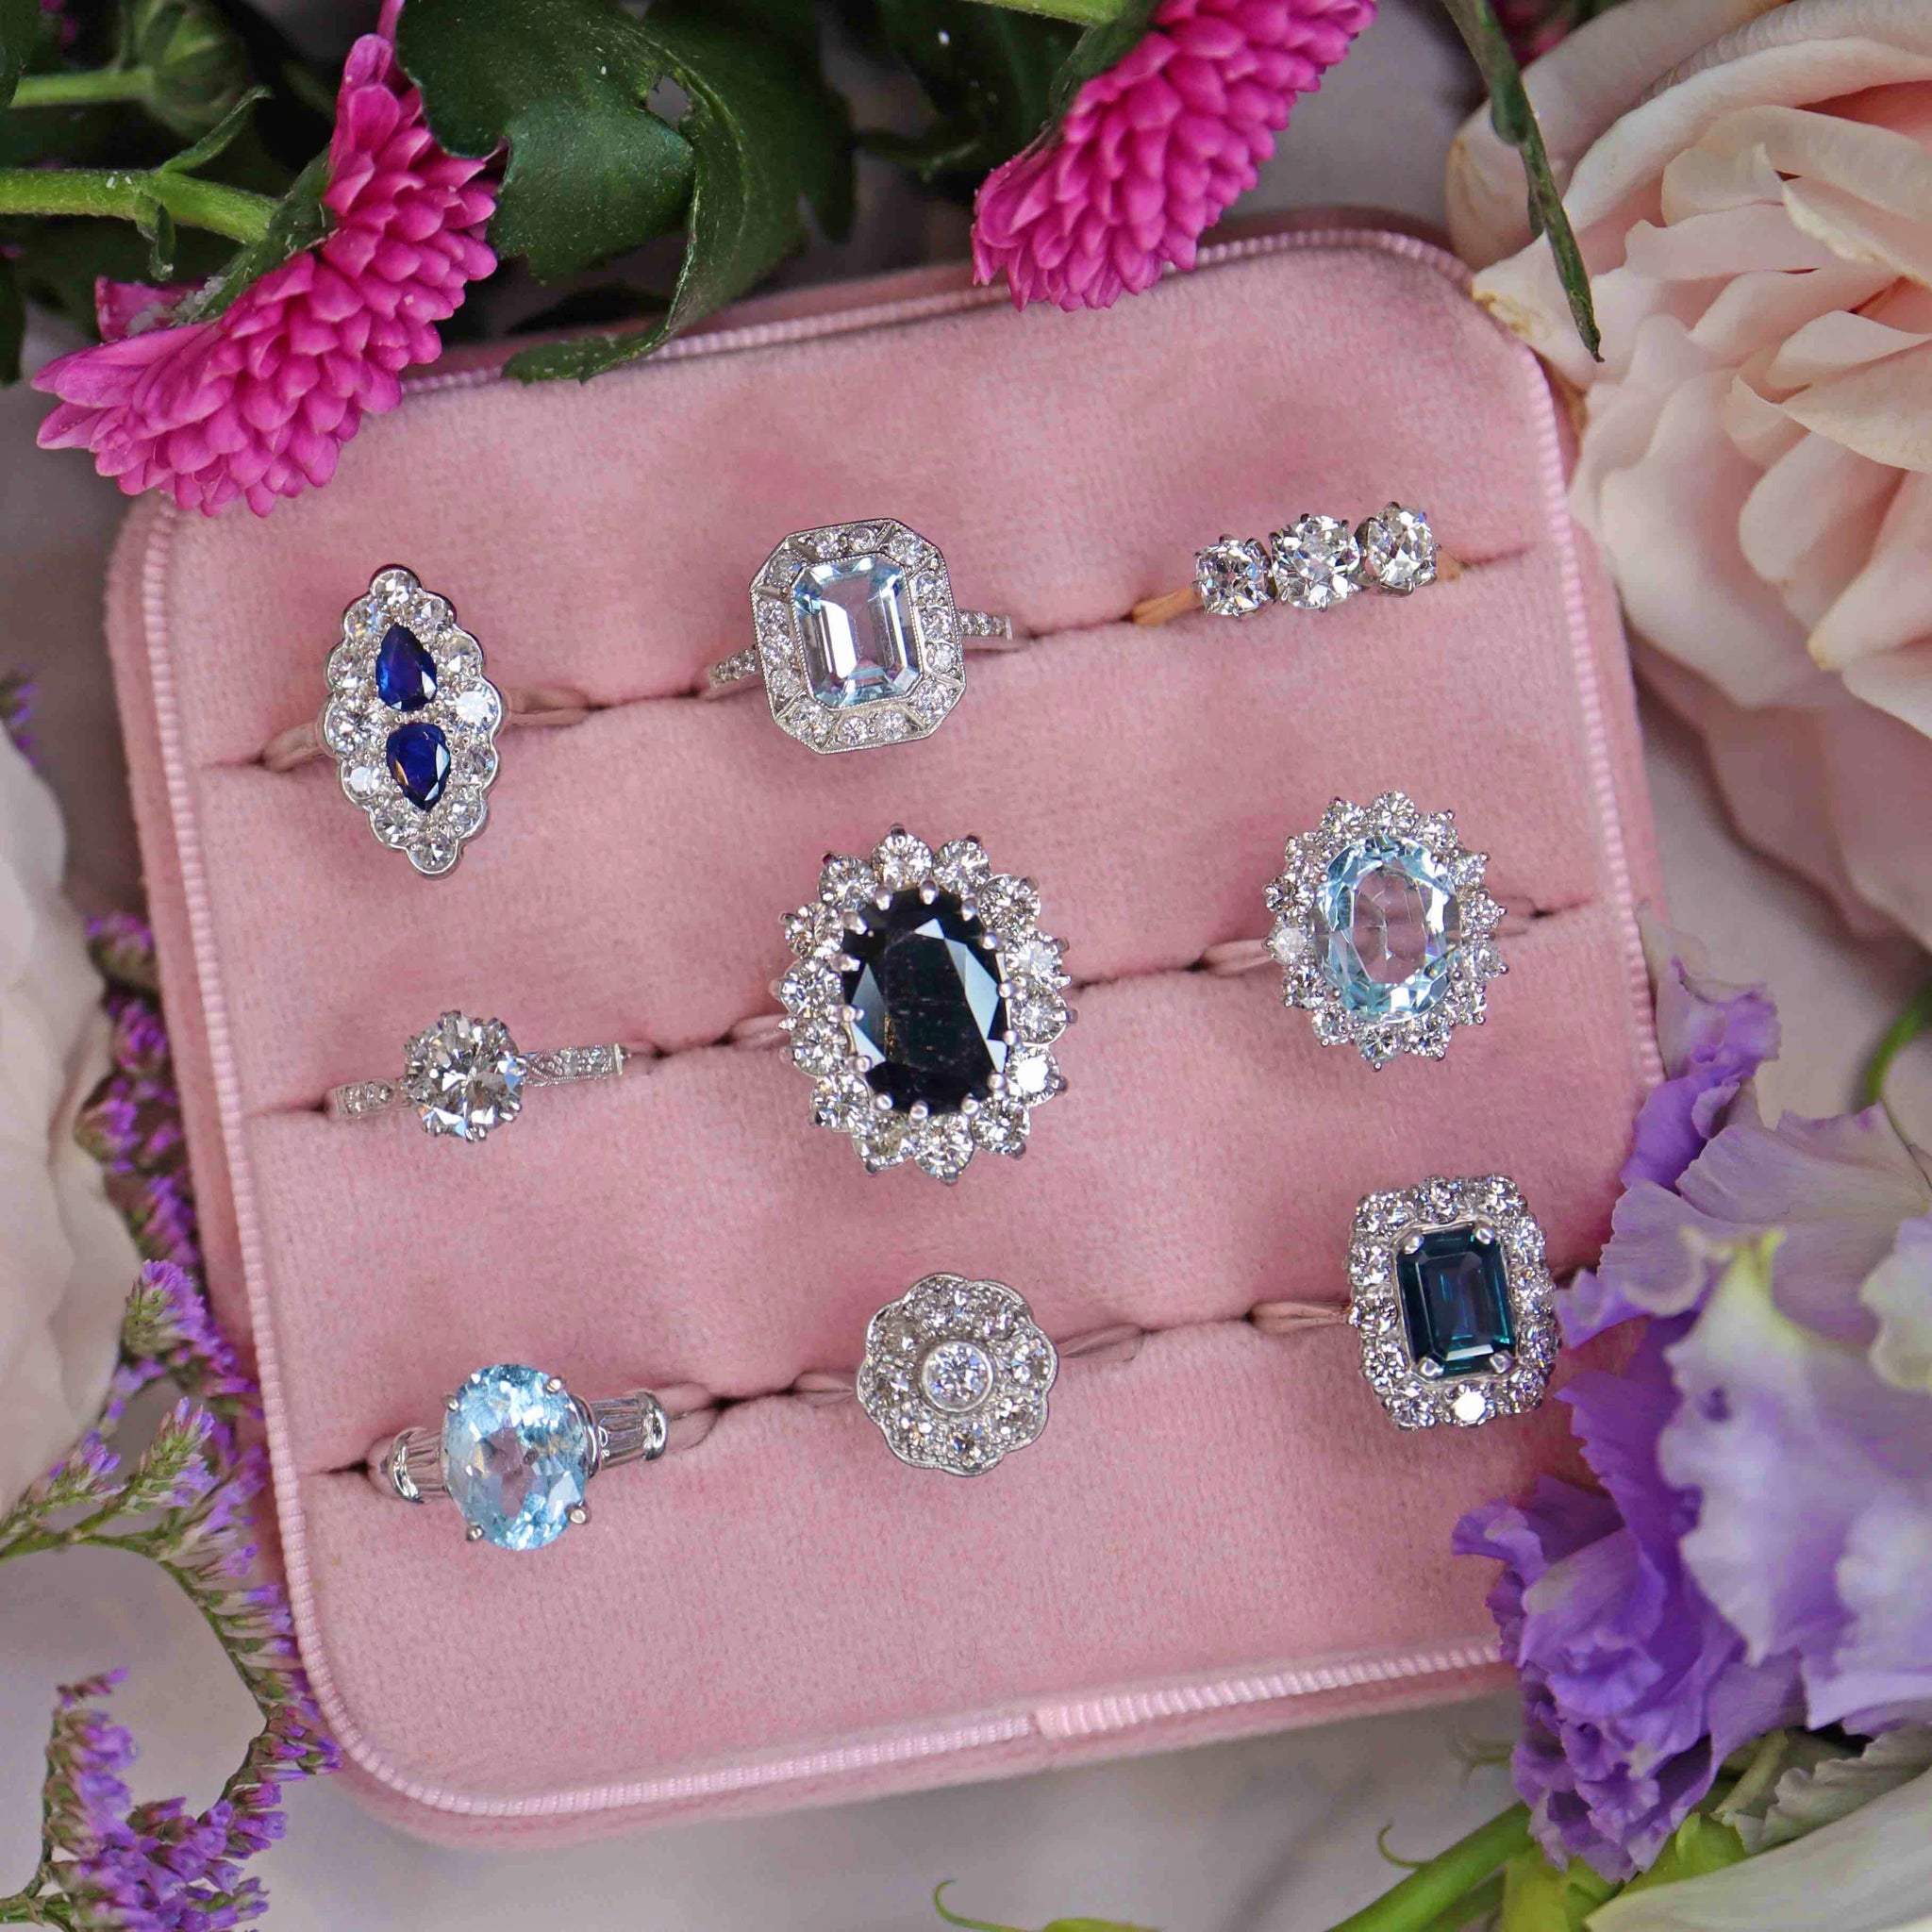 engagement rings in a tray